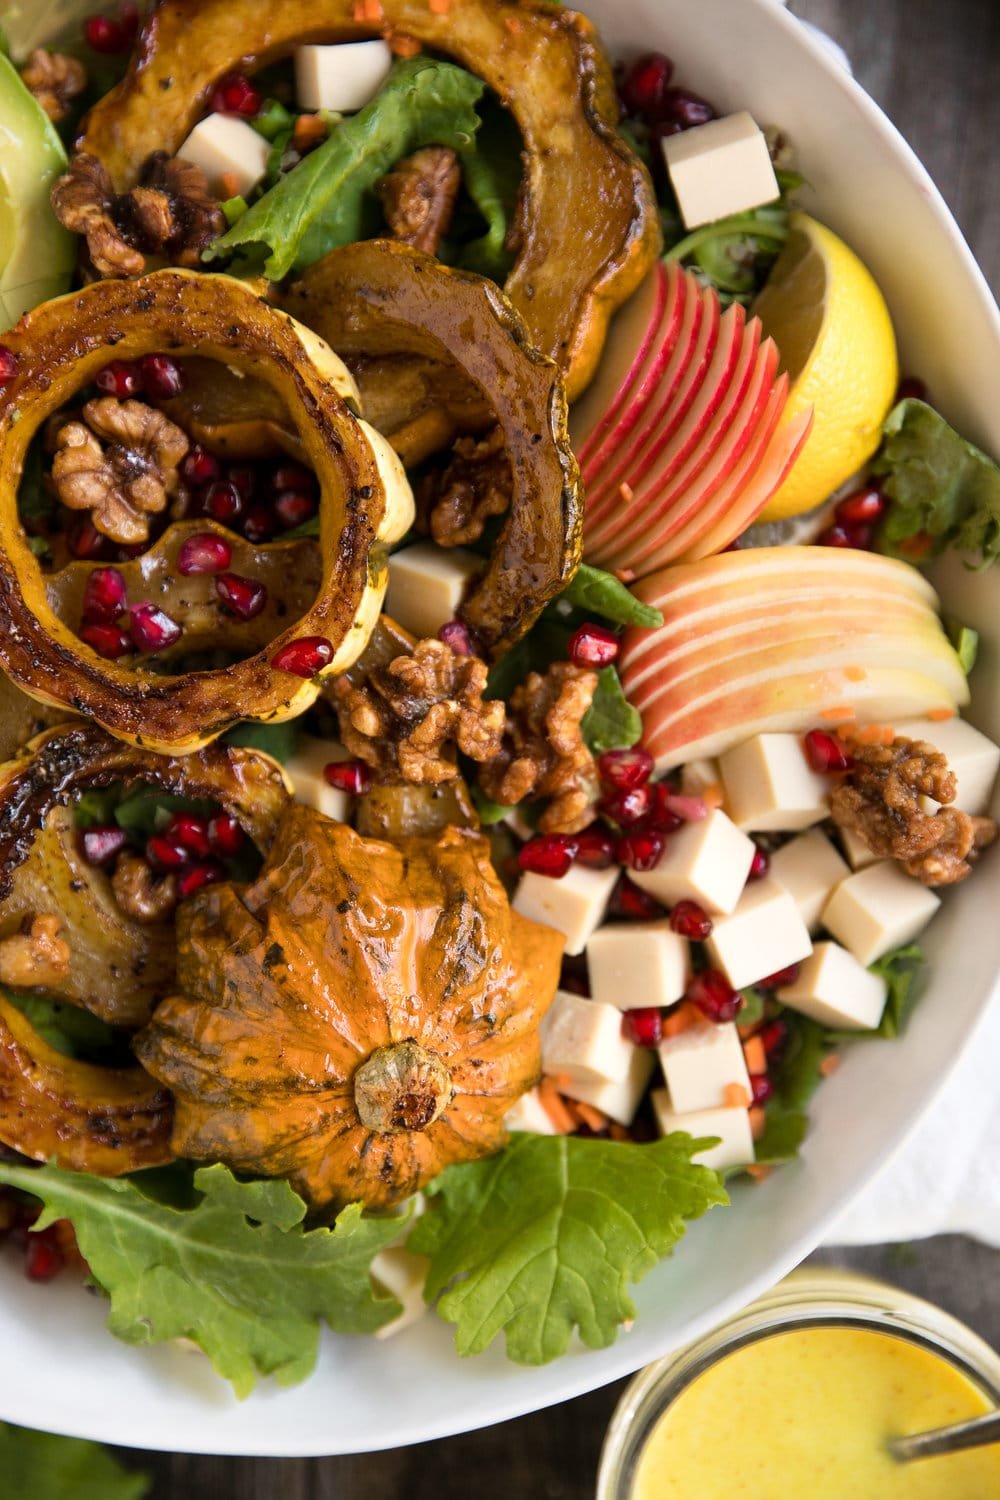 A plate of food, with Apple and Salad and acorn squash